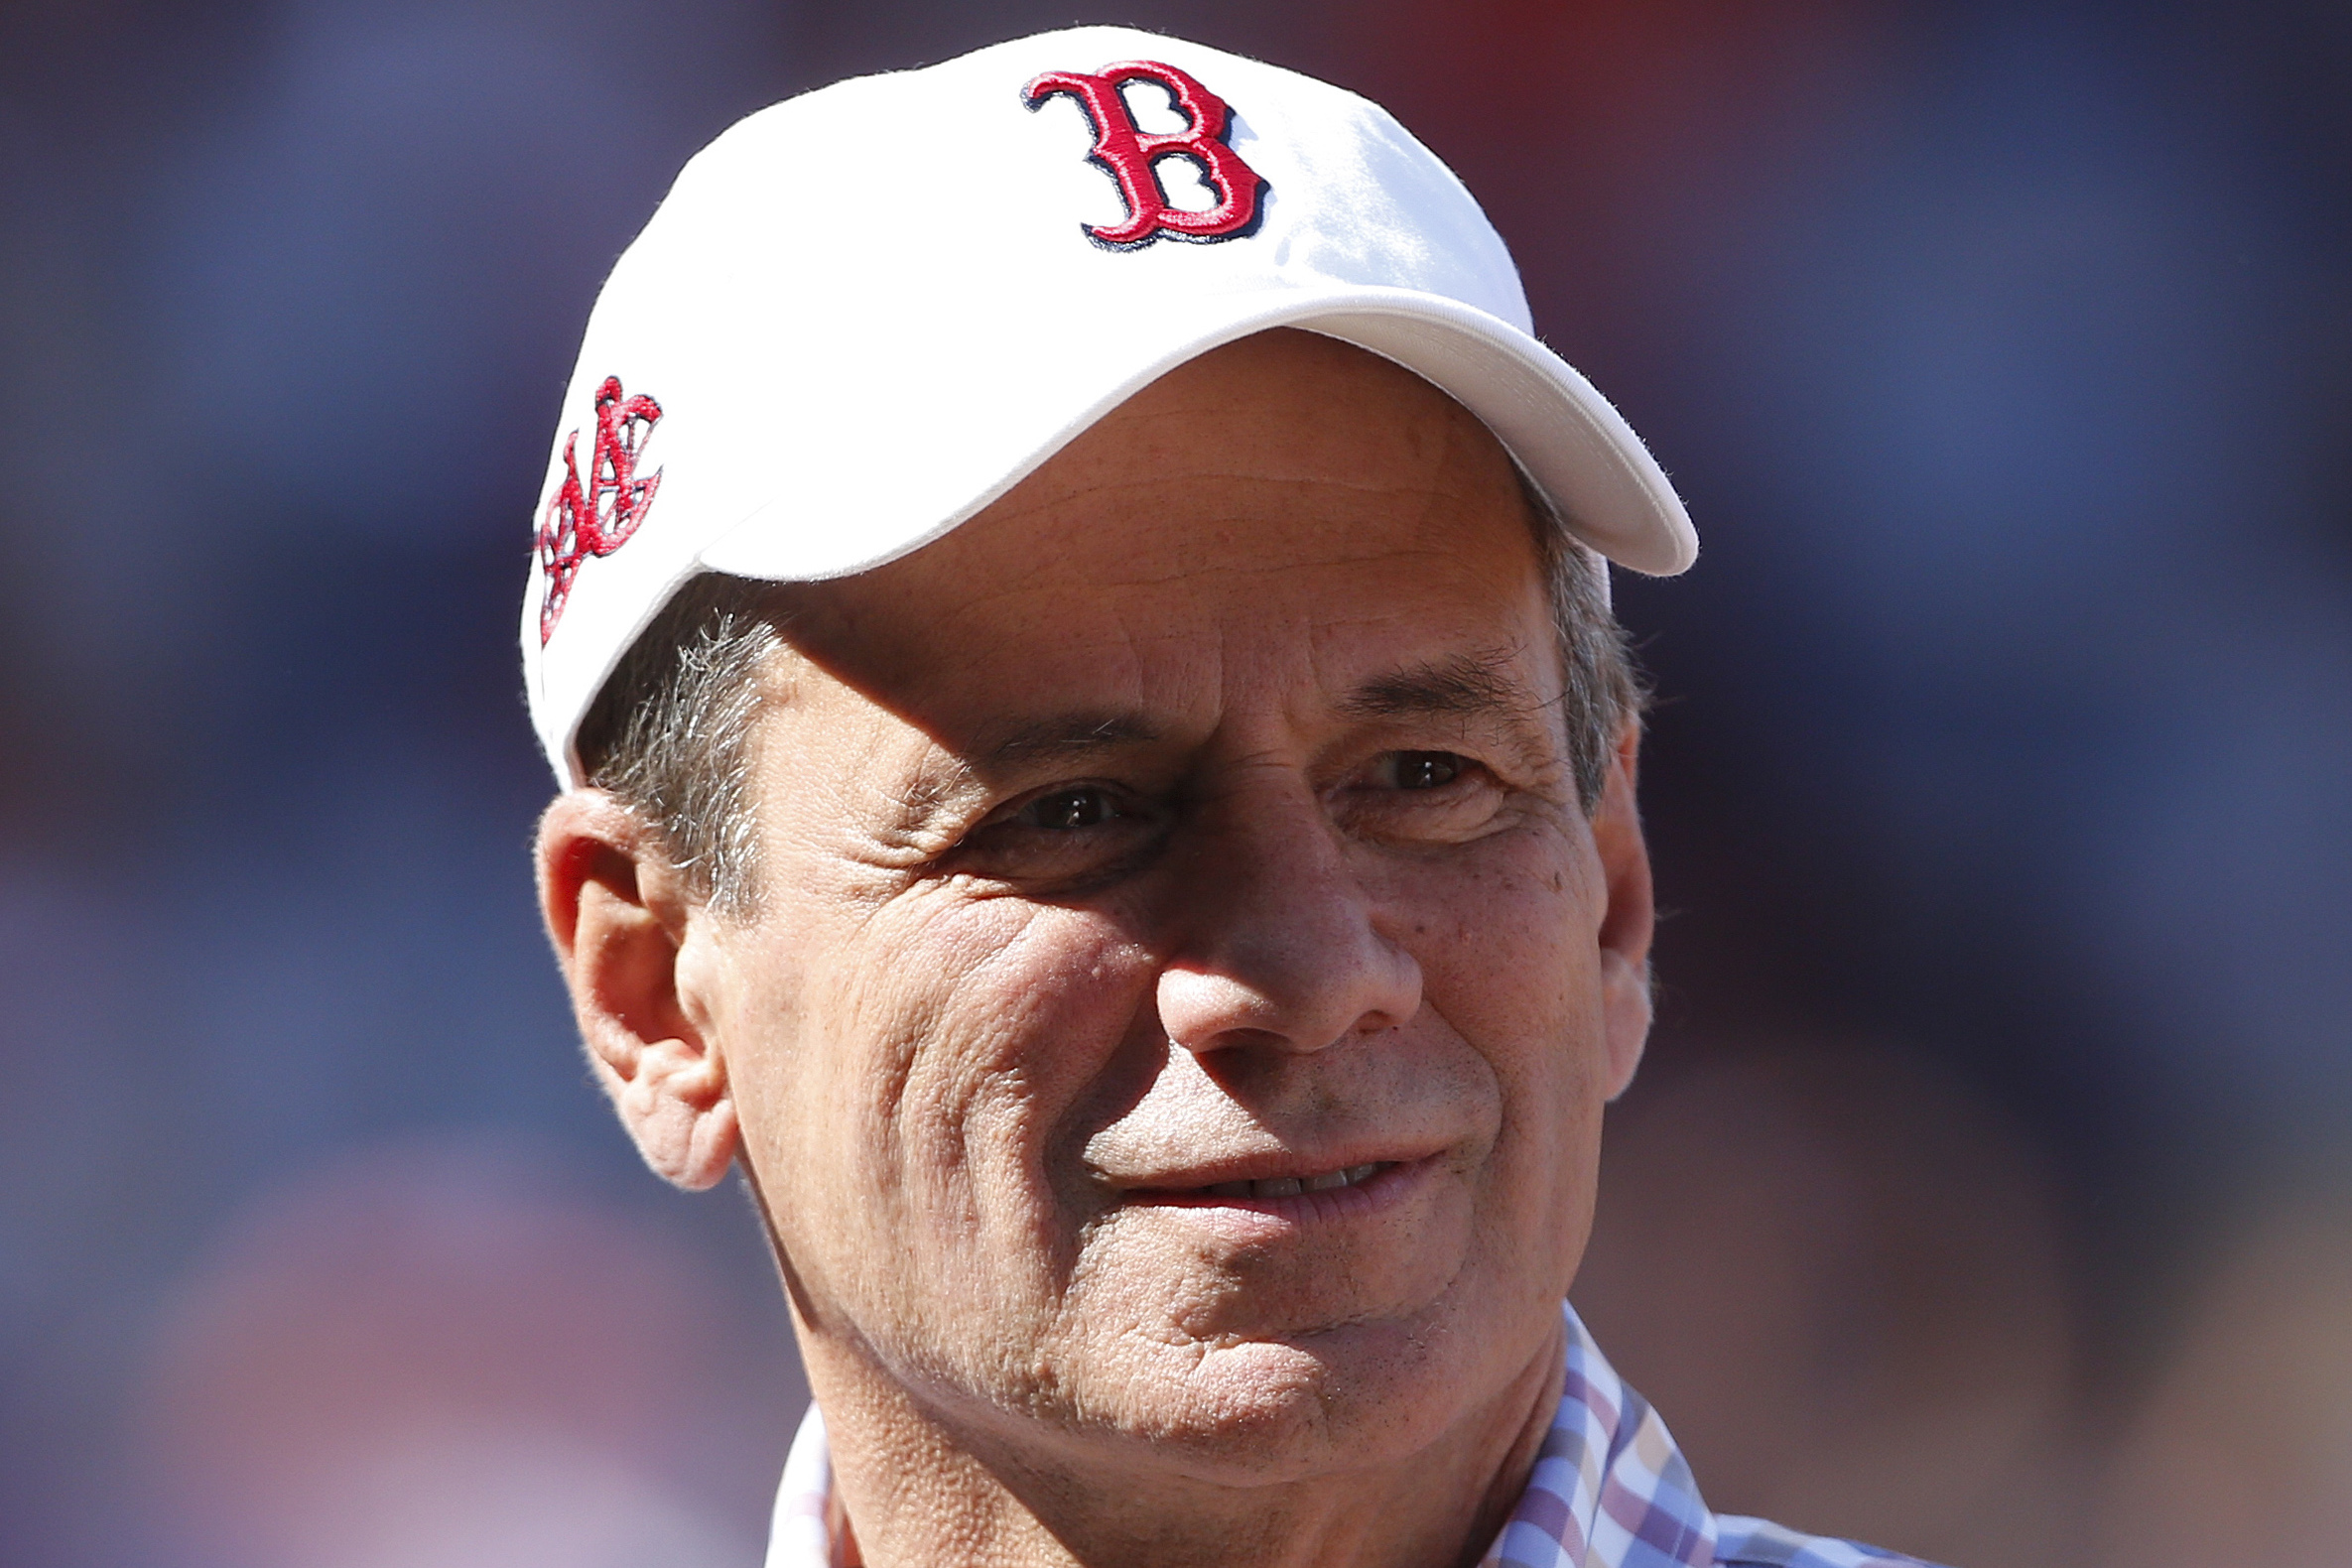 Larry Lucchino: Leader, Builder, Fighter, Champ